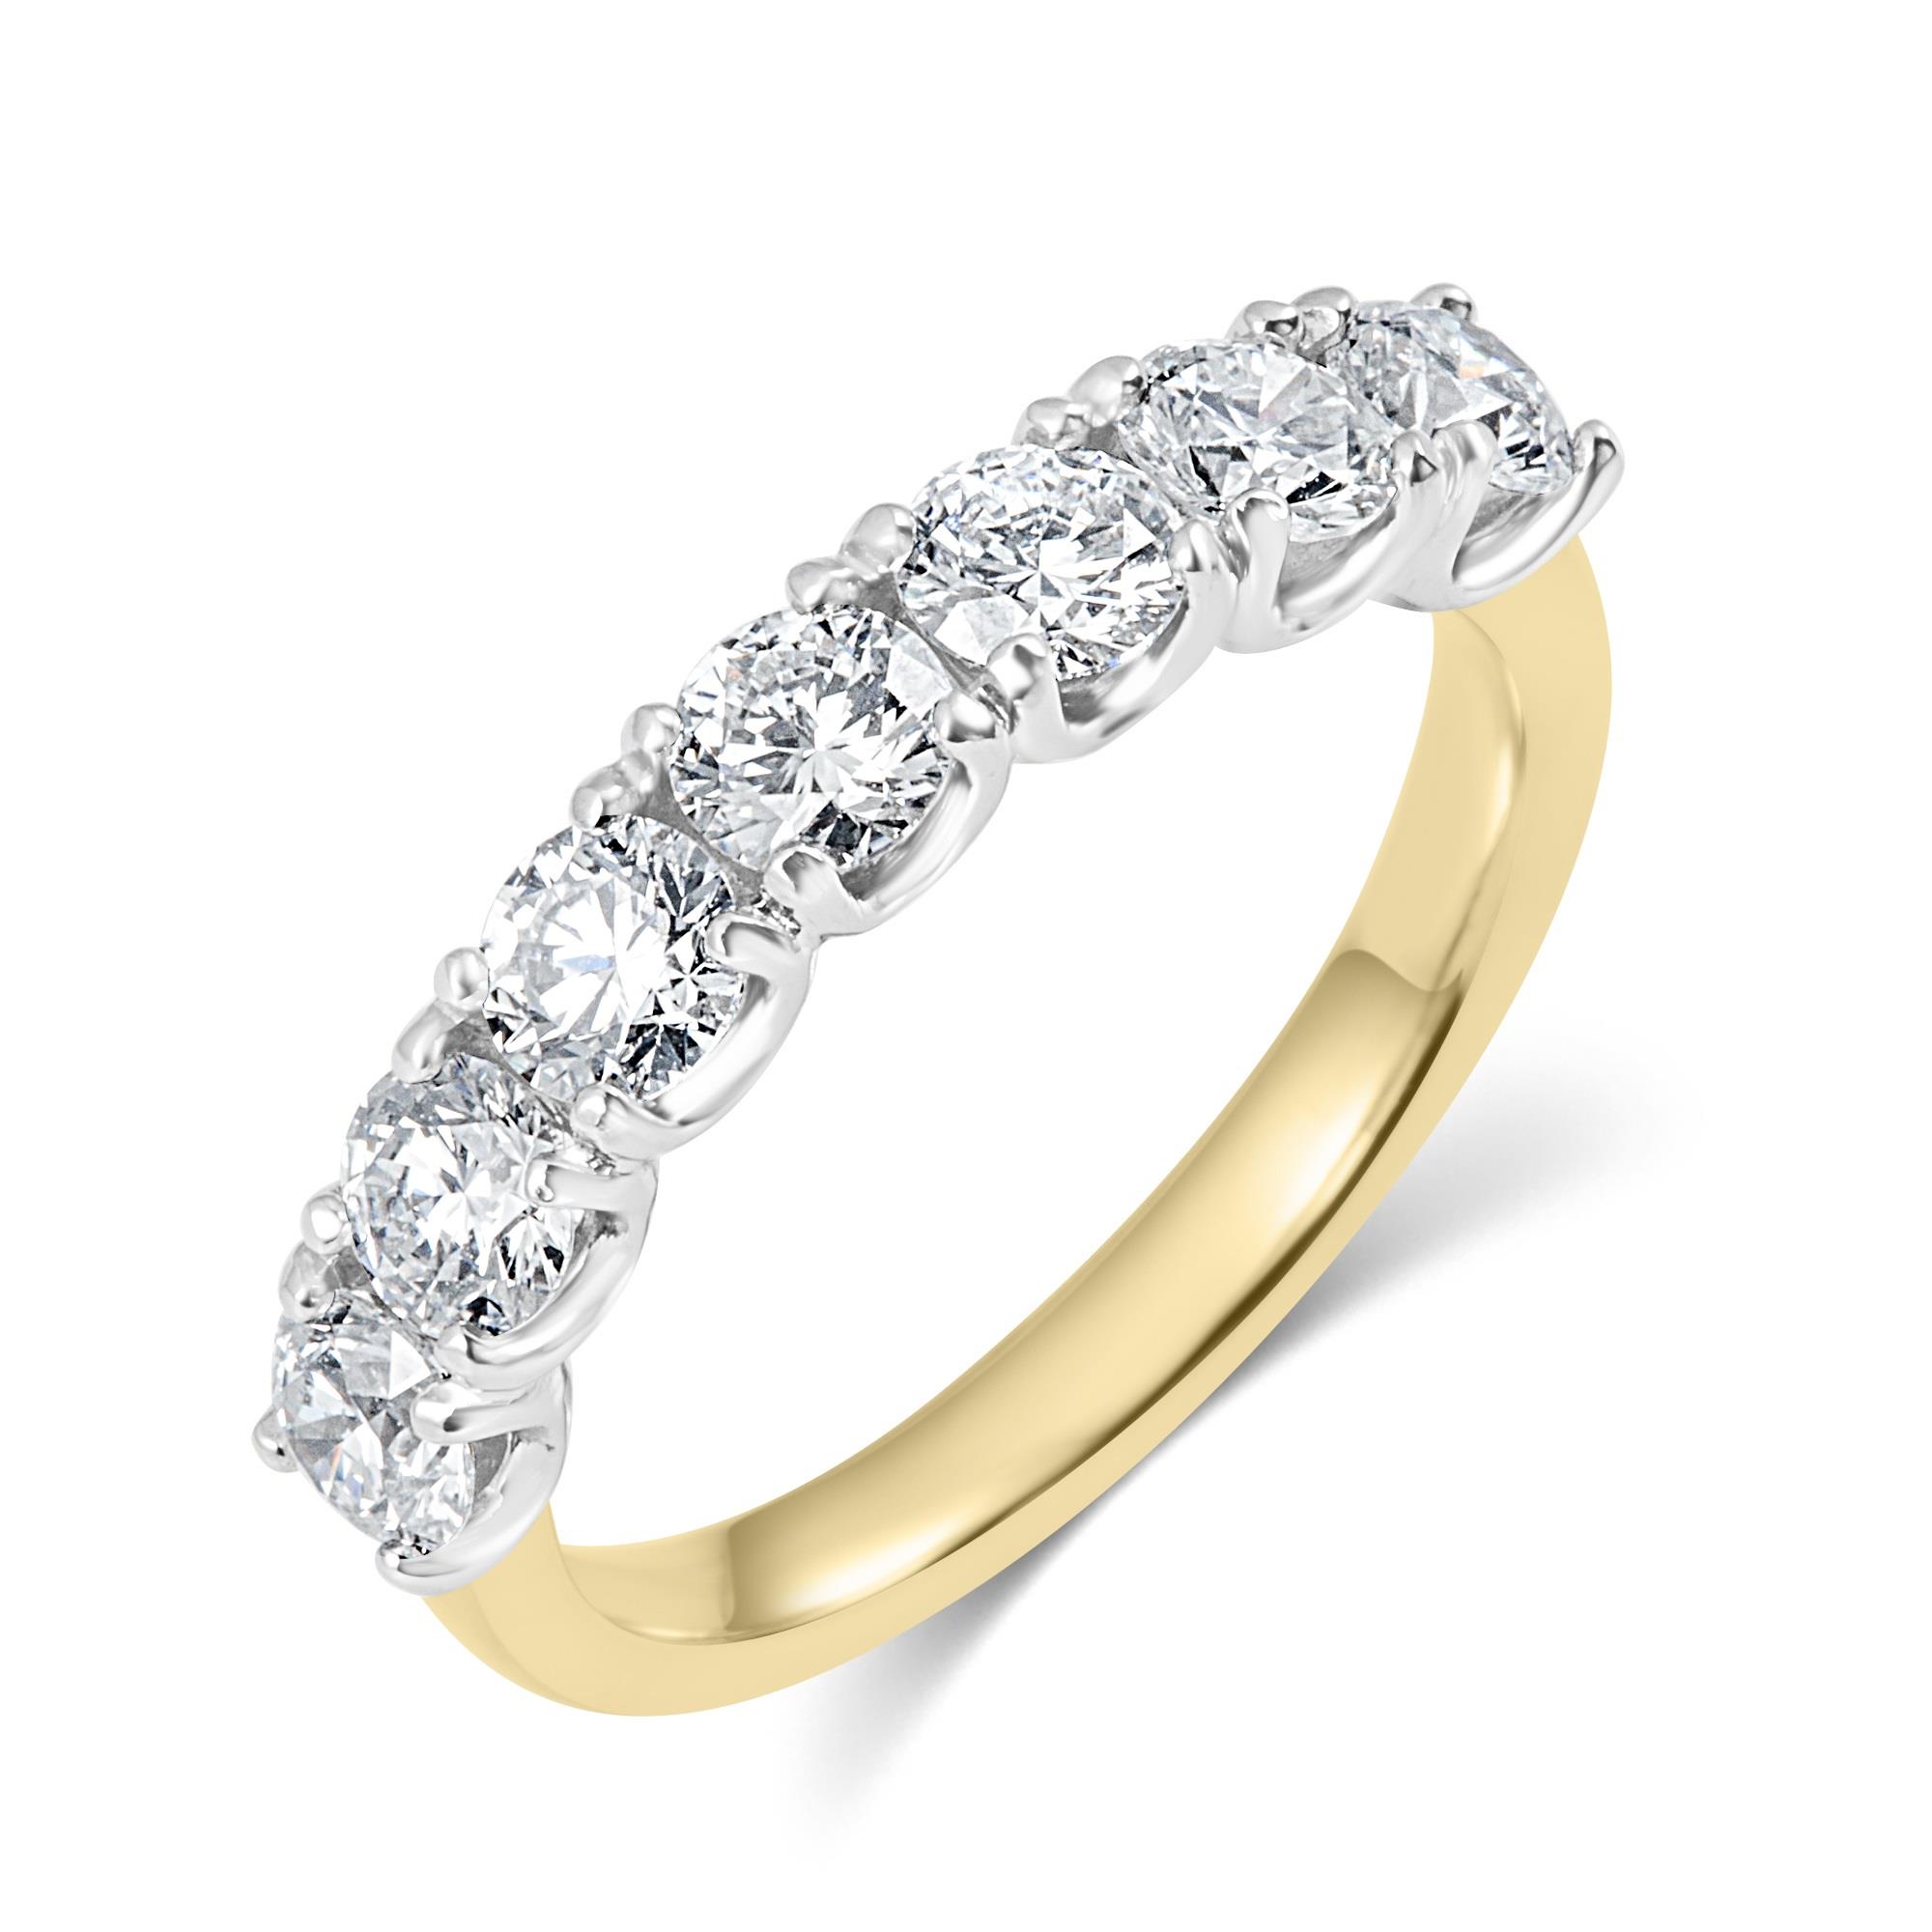 White gold eternity ring with diamonds drives hard